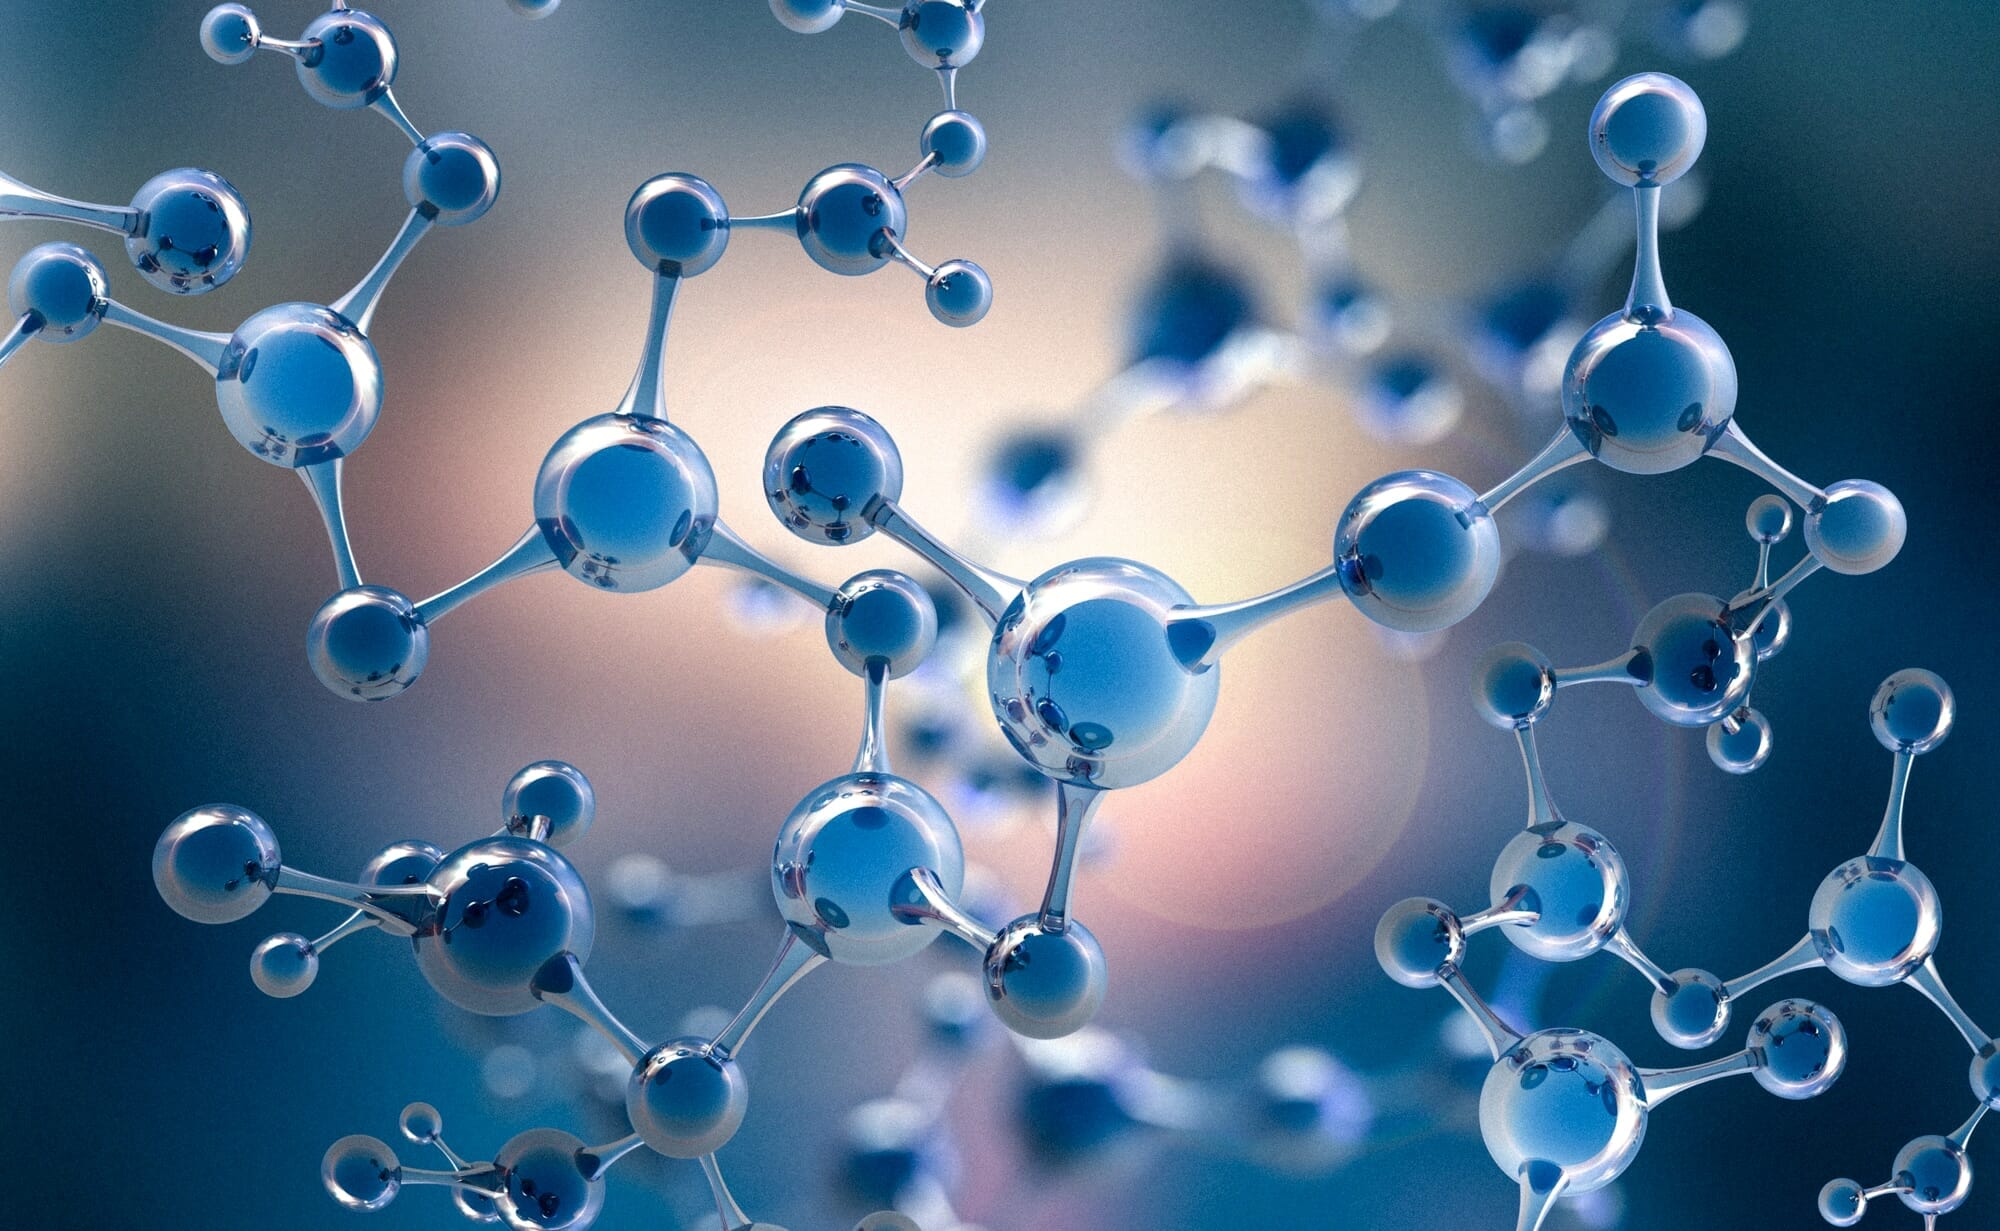 Abstract molecule model. Scientific research in molecular chemistry. 3D illustration on a blue background